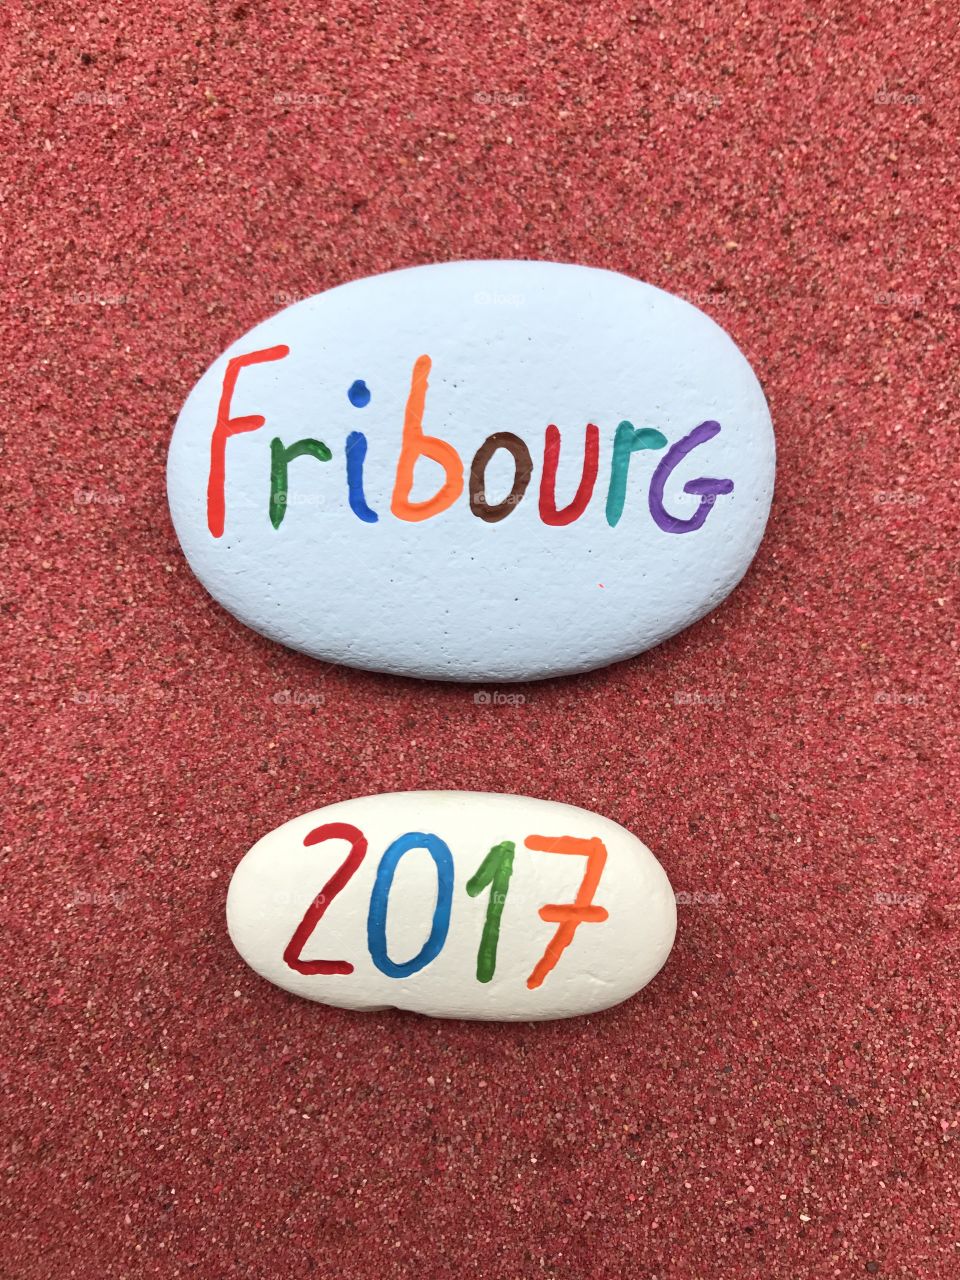 Fribourg 2017, souvenir on painted stones over red sand 